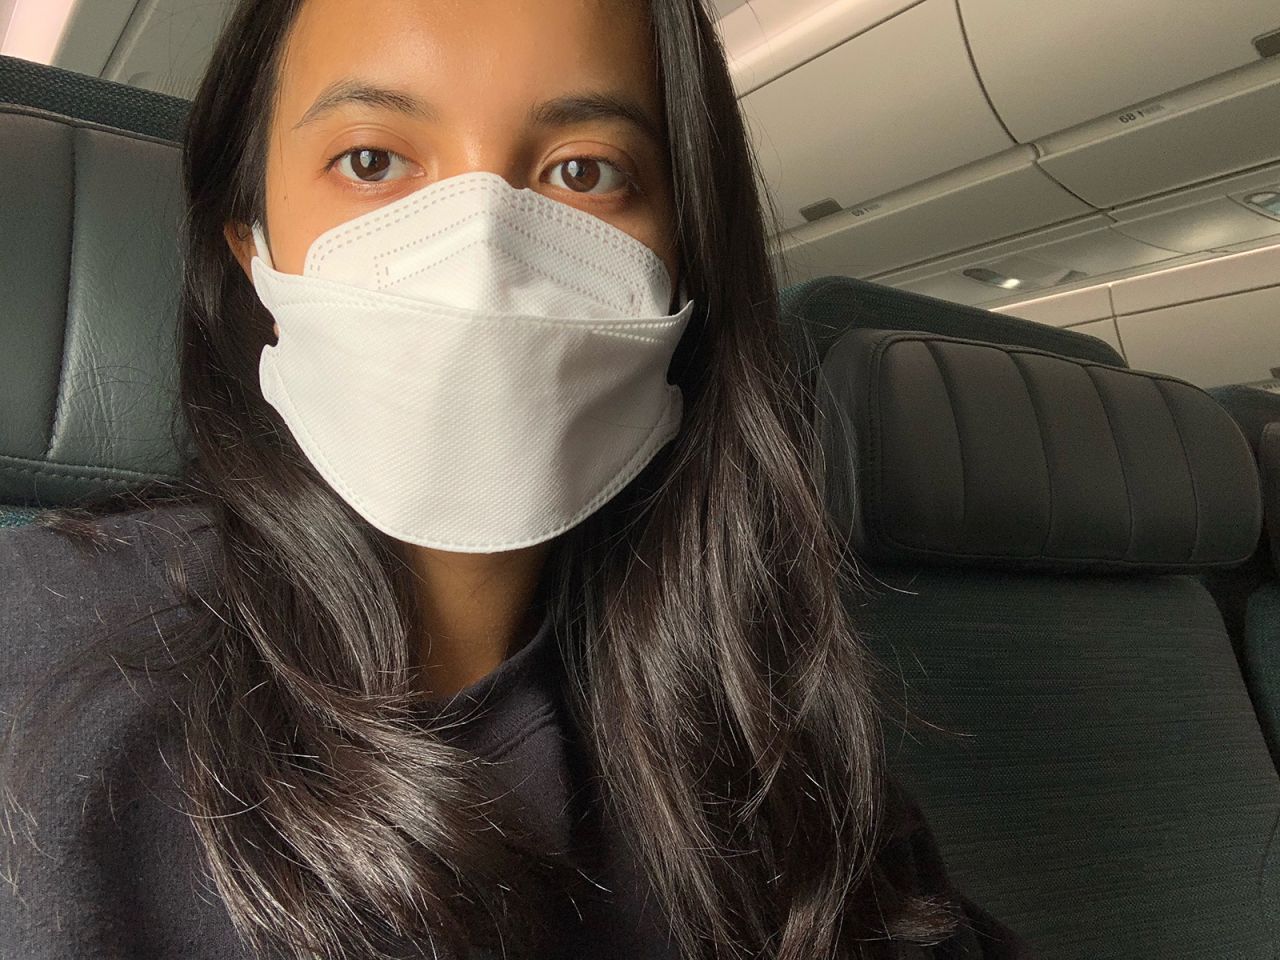 <strong>Hotel Quarantine:</strong> Writer Karina Tsui traveled from the U.S. home to Hong Kong, but because of strict government regulations had to quarantine in a hotel instead of at her own apartment.